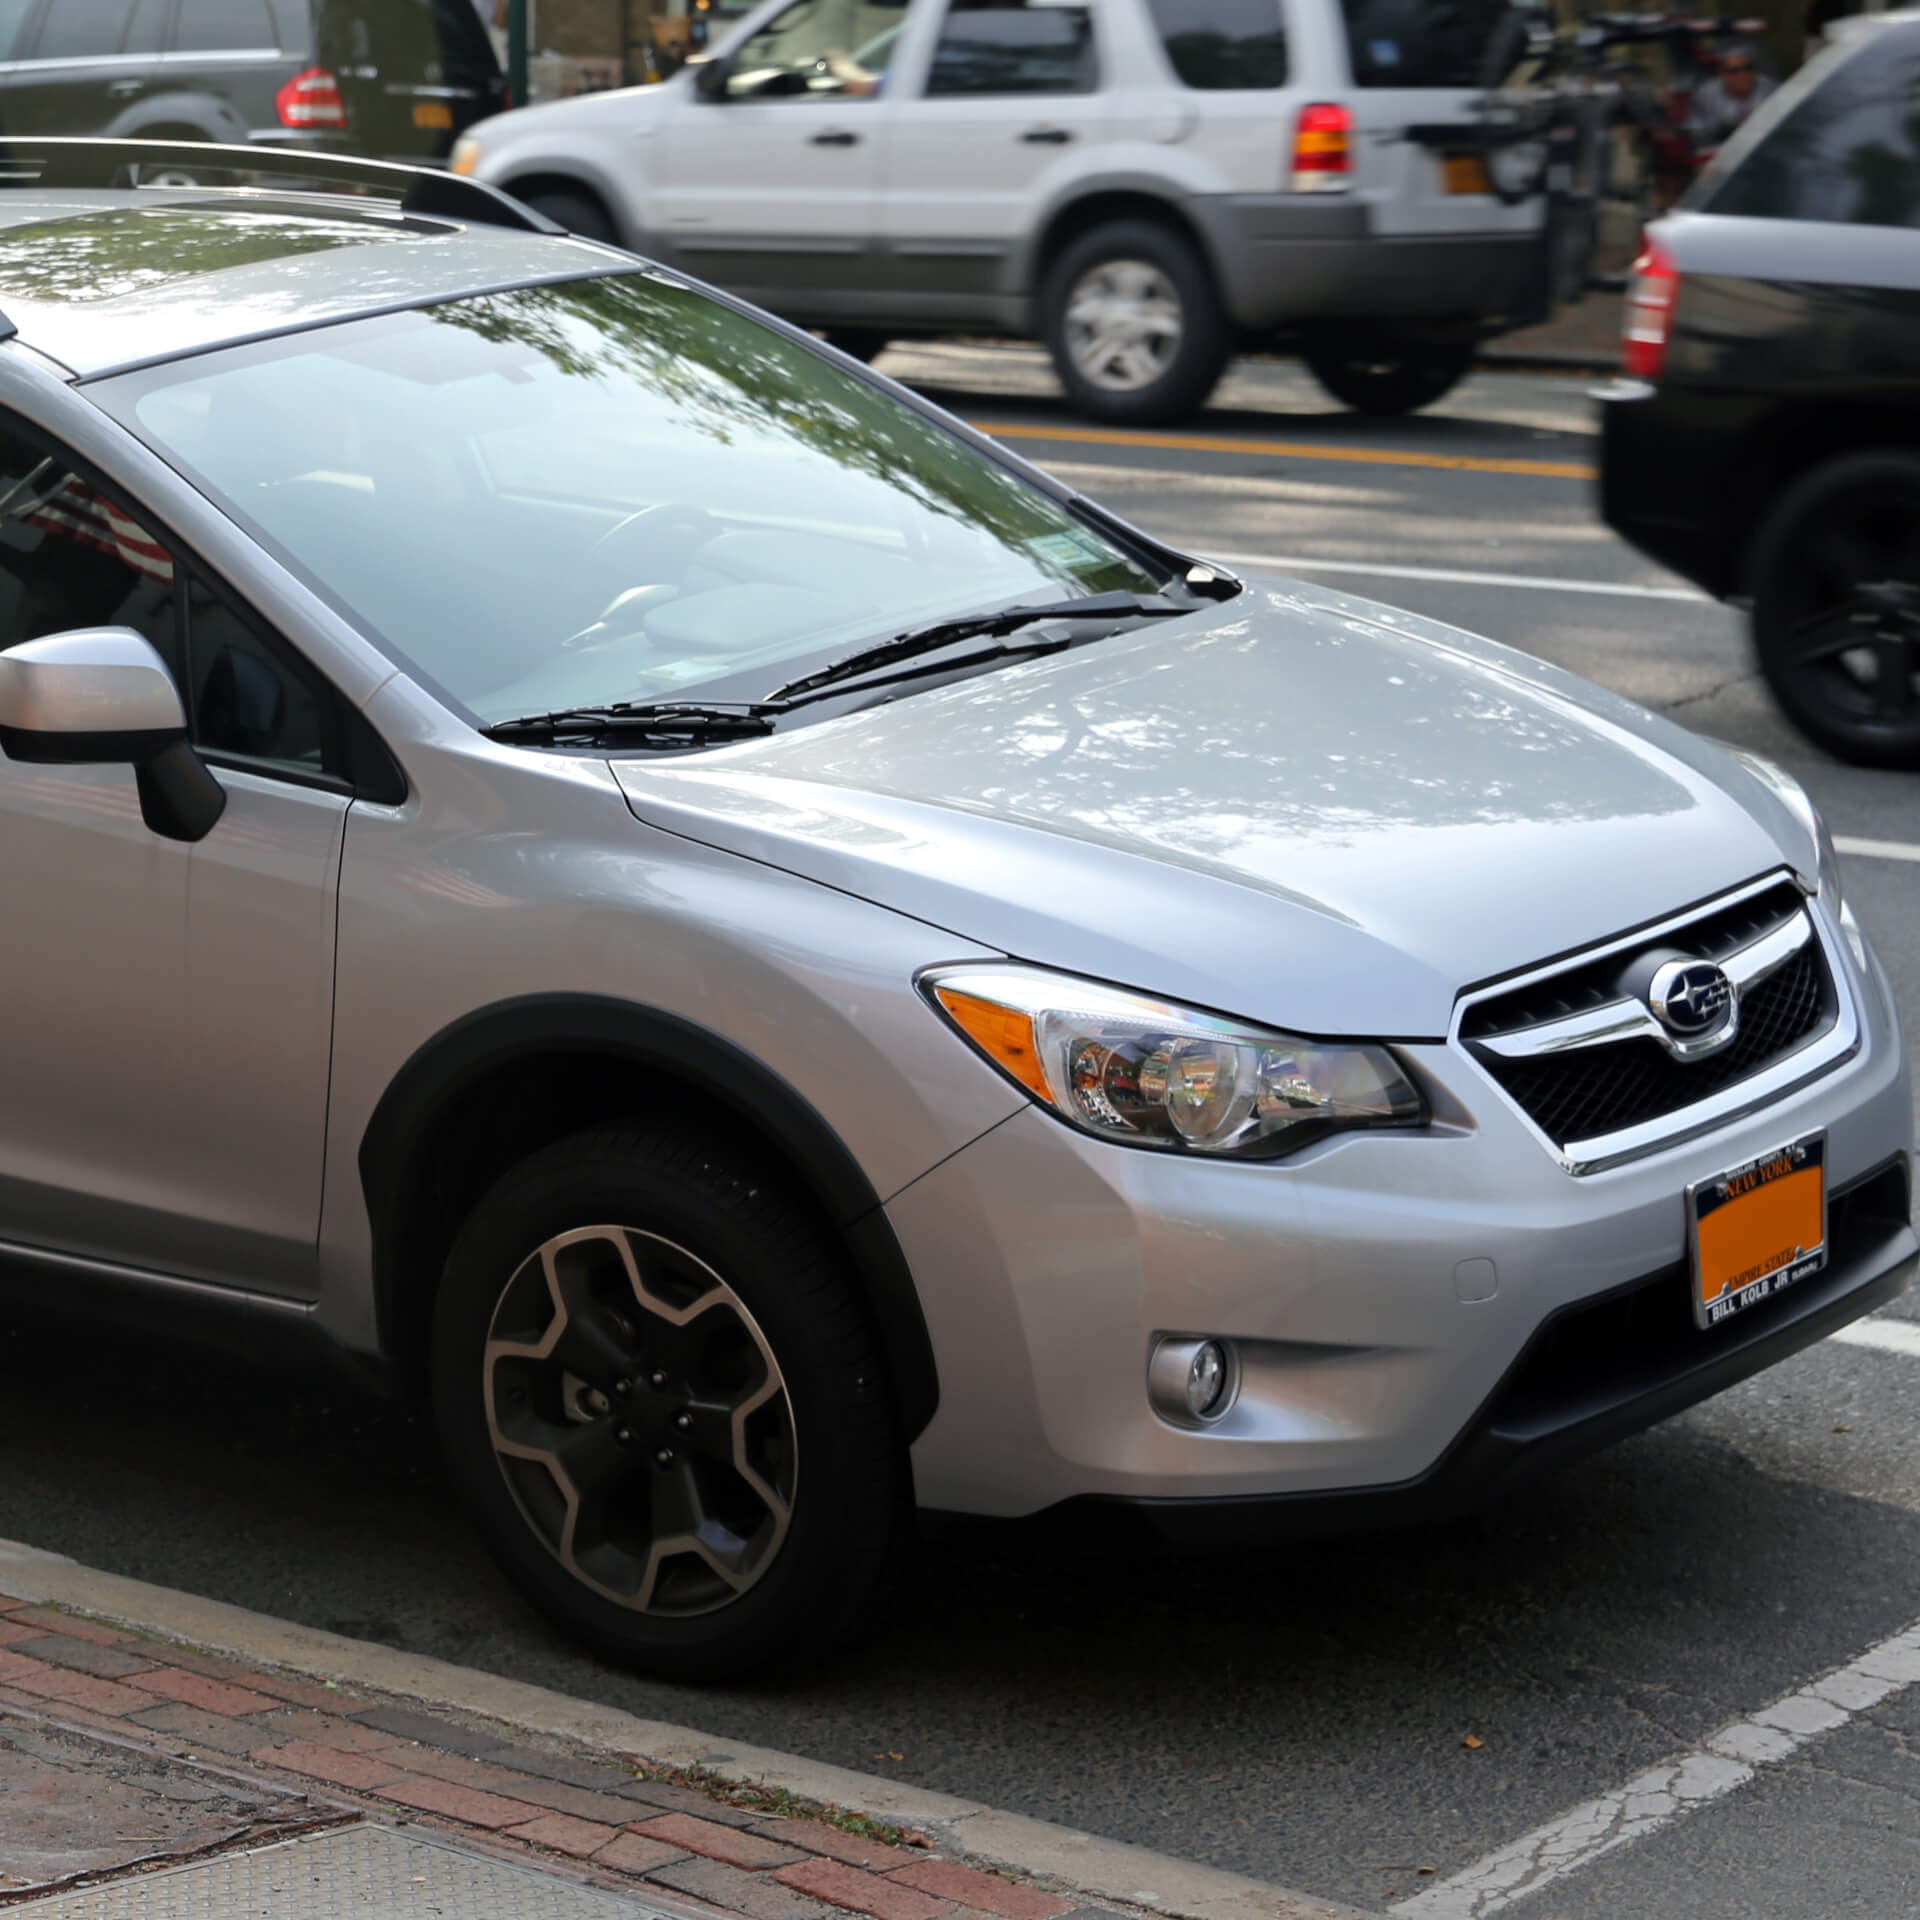 Direct4x4 accessories for Subaru XV vehicles with a photo of a silver Subaru XV parked at the side of a busy road